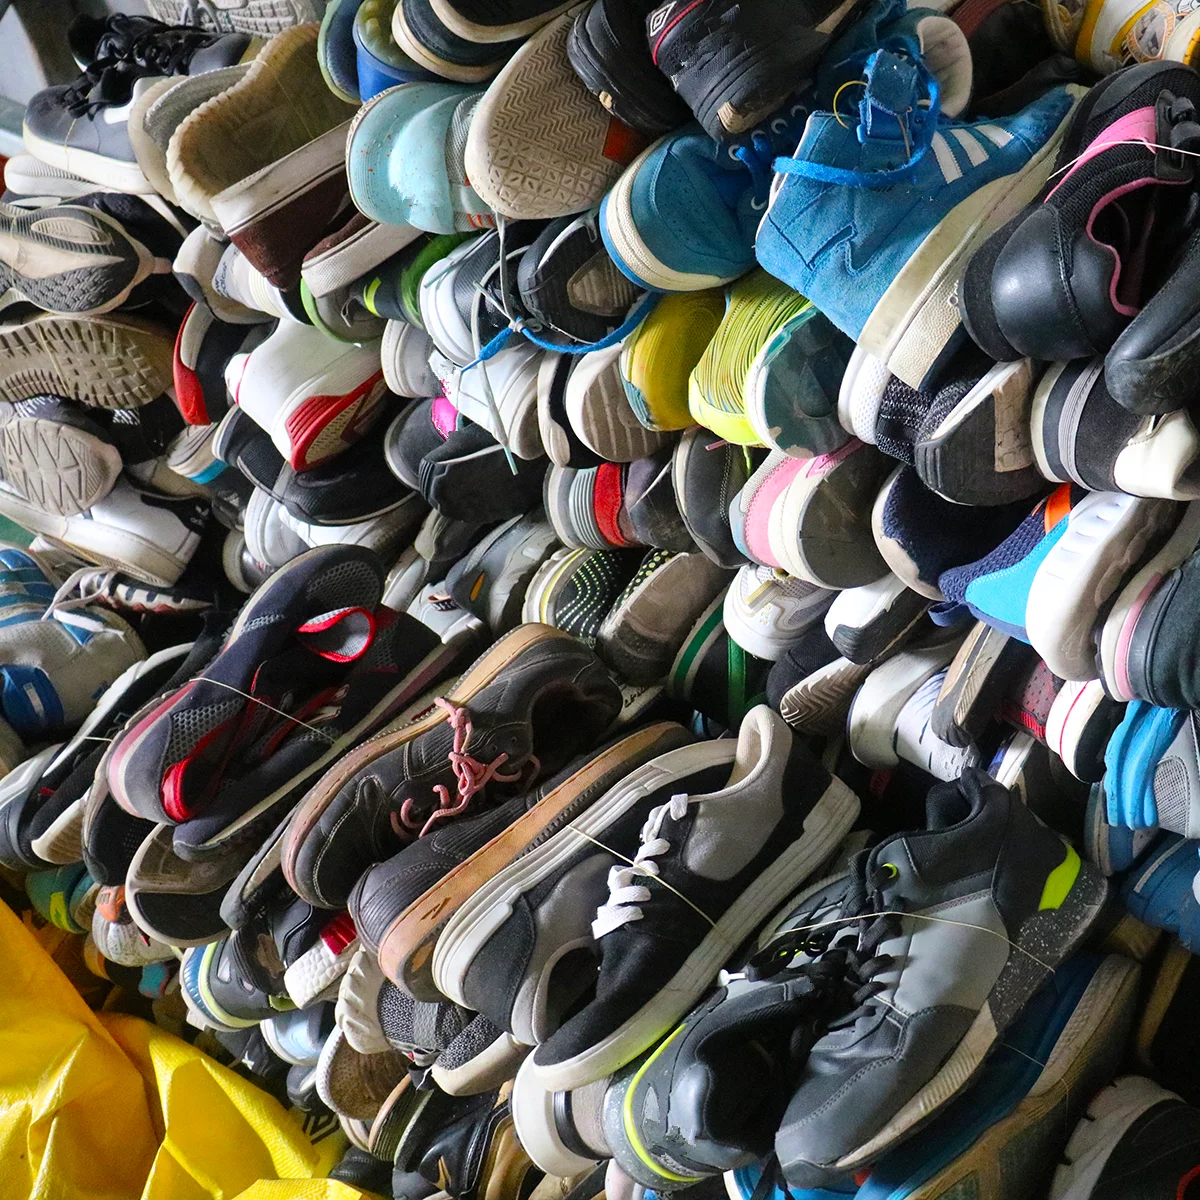 Cheap Used Branded Shoes Usa Stock Shoes Stocks Man Mixed Second Hand Shoes  - Buy Bulk Shoes,Kids Sandals And Shoes Second Hand,Used Basketball Shoes  Product on 